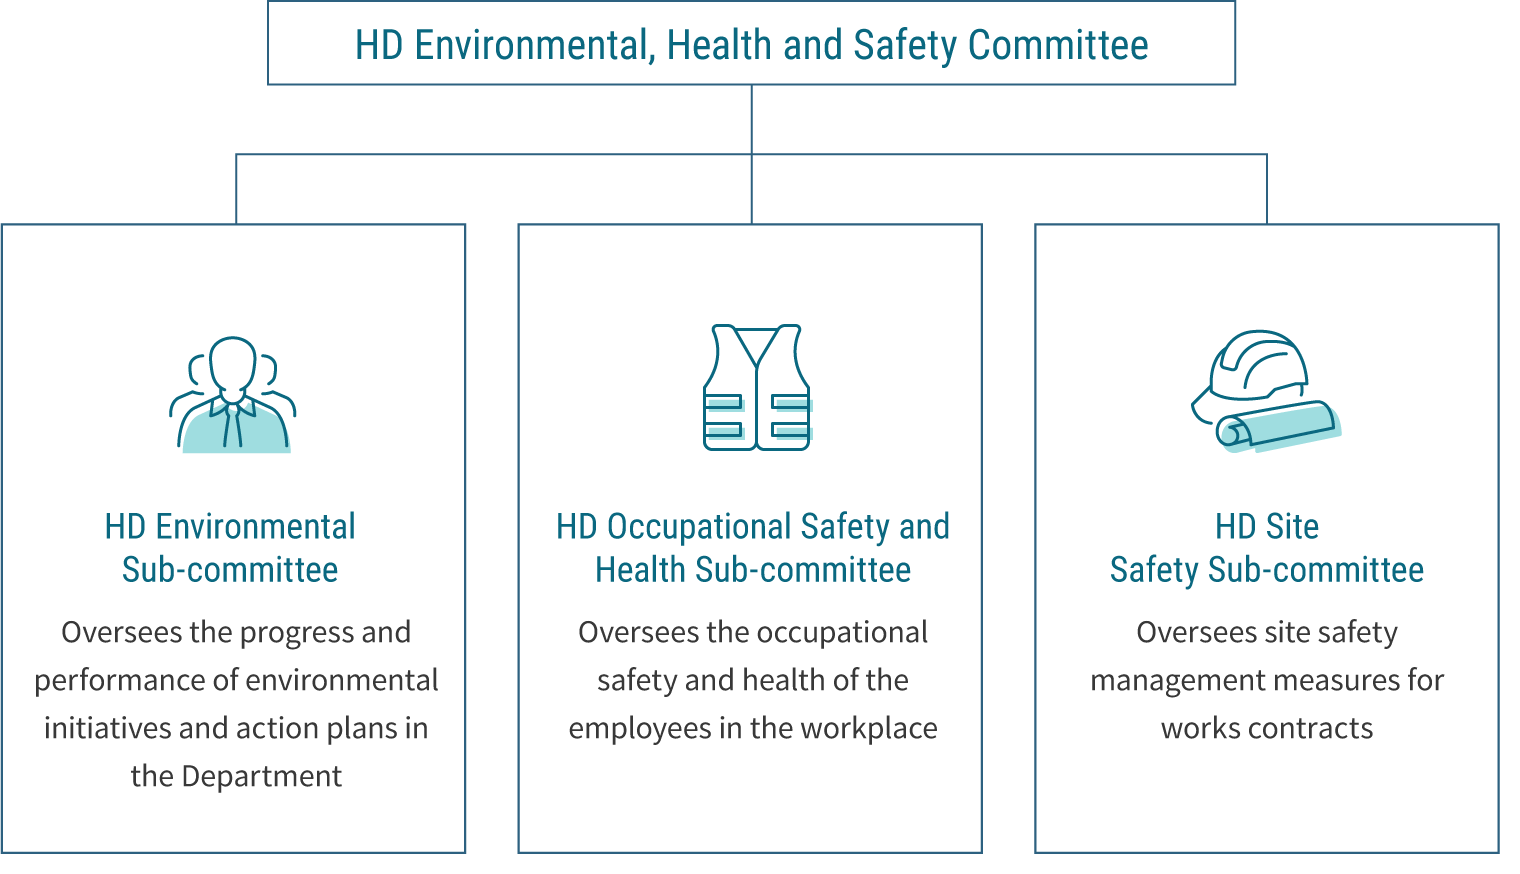 HD Environmental, Health and Safety Committee